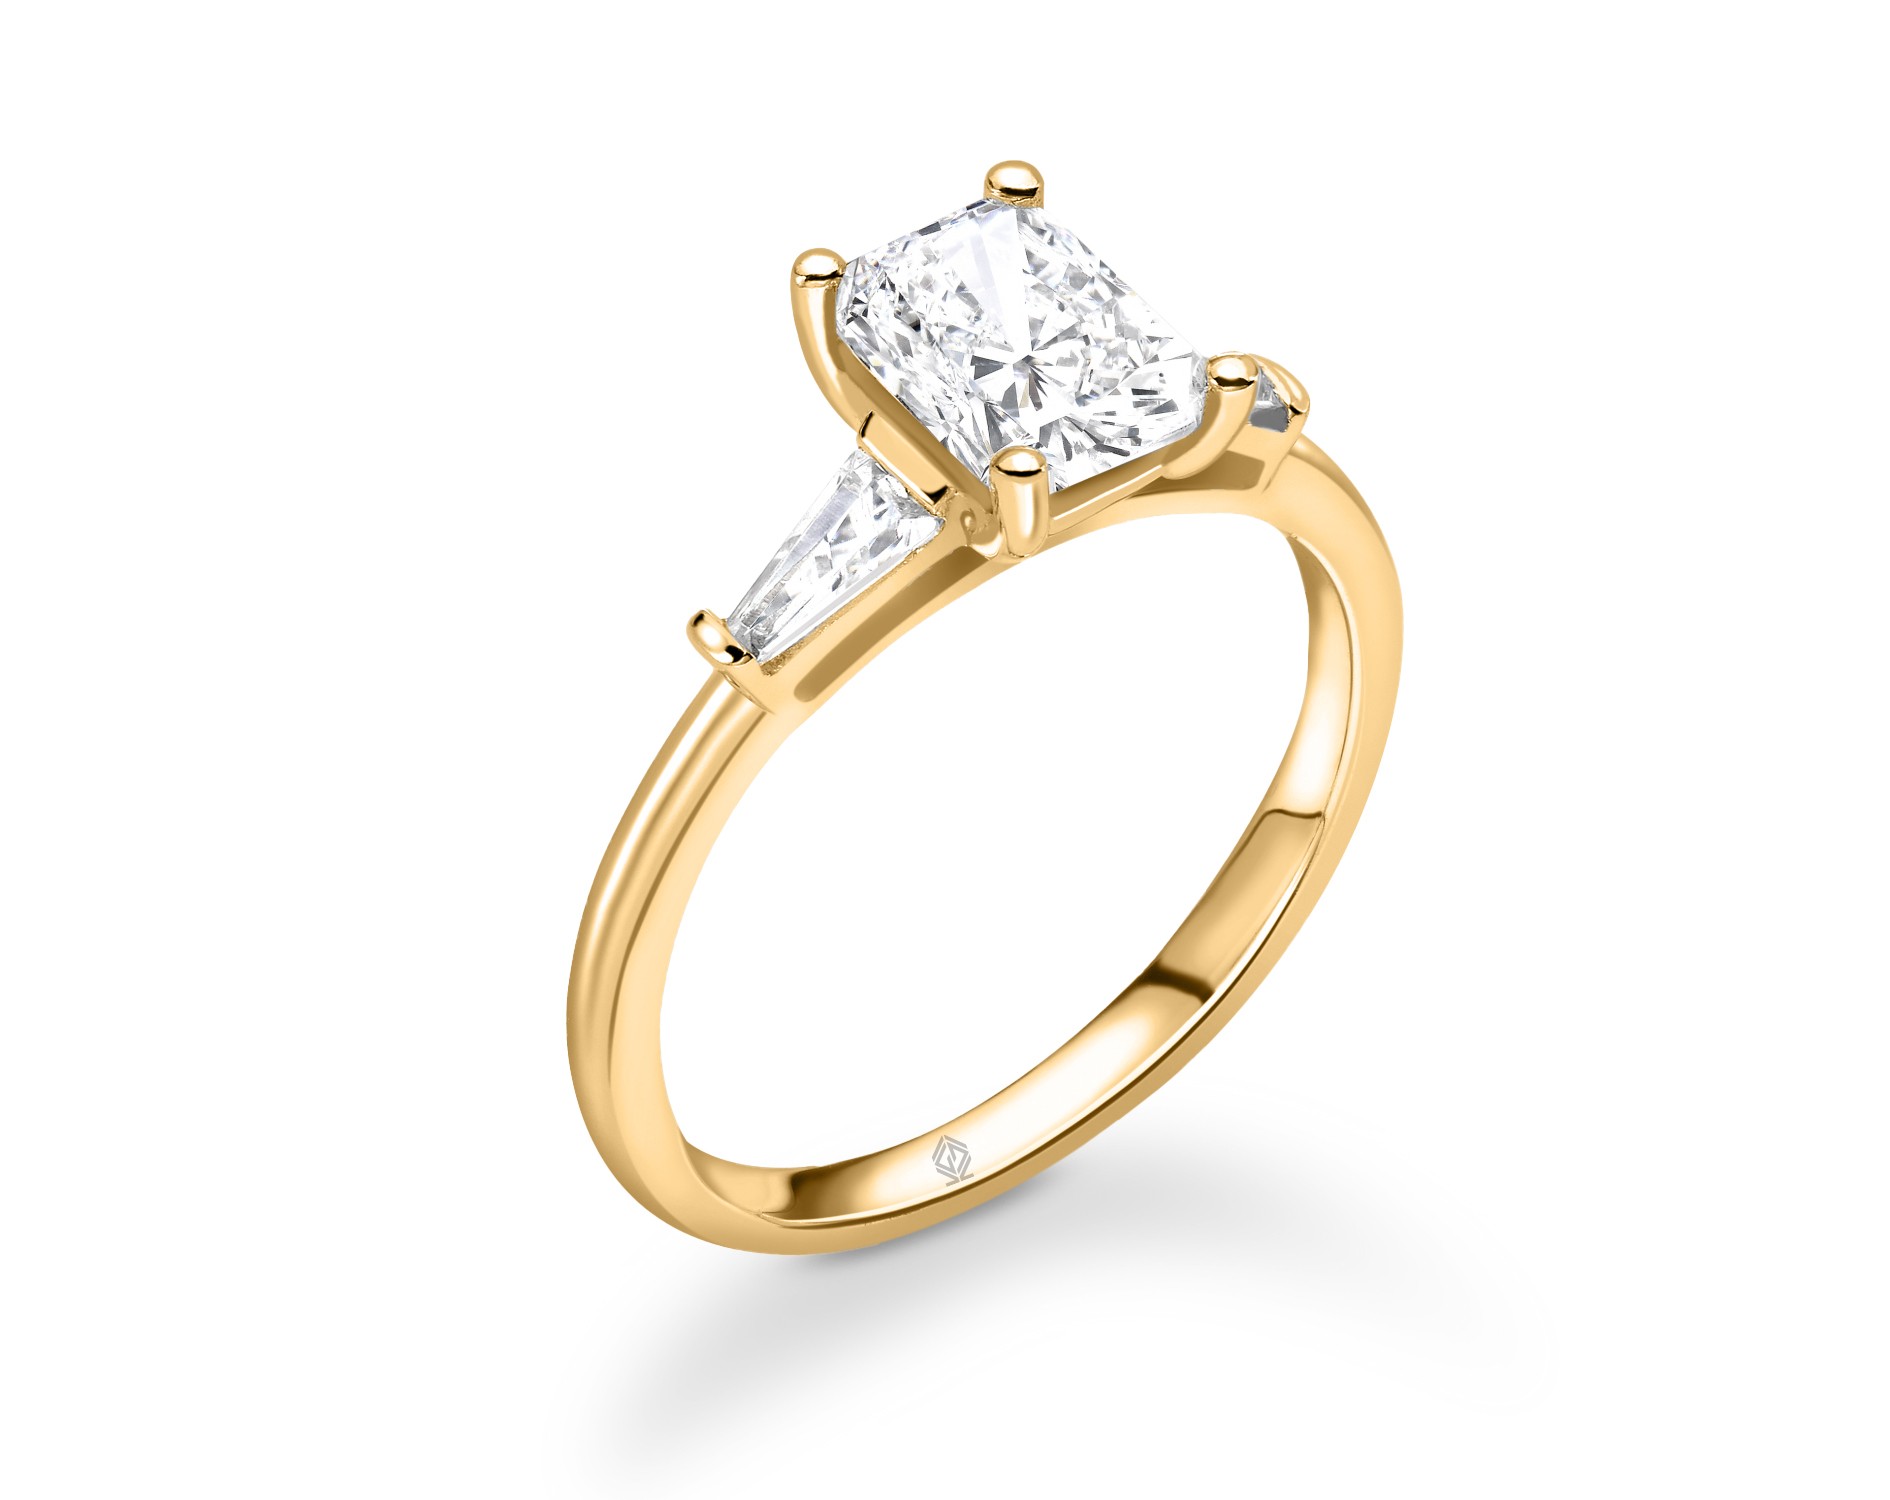 18K YELLOW GOLD CUSHION CUT DIAMOND ENGAGEMENT RING WITH BAGUETTES CUT SIDE STONES